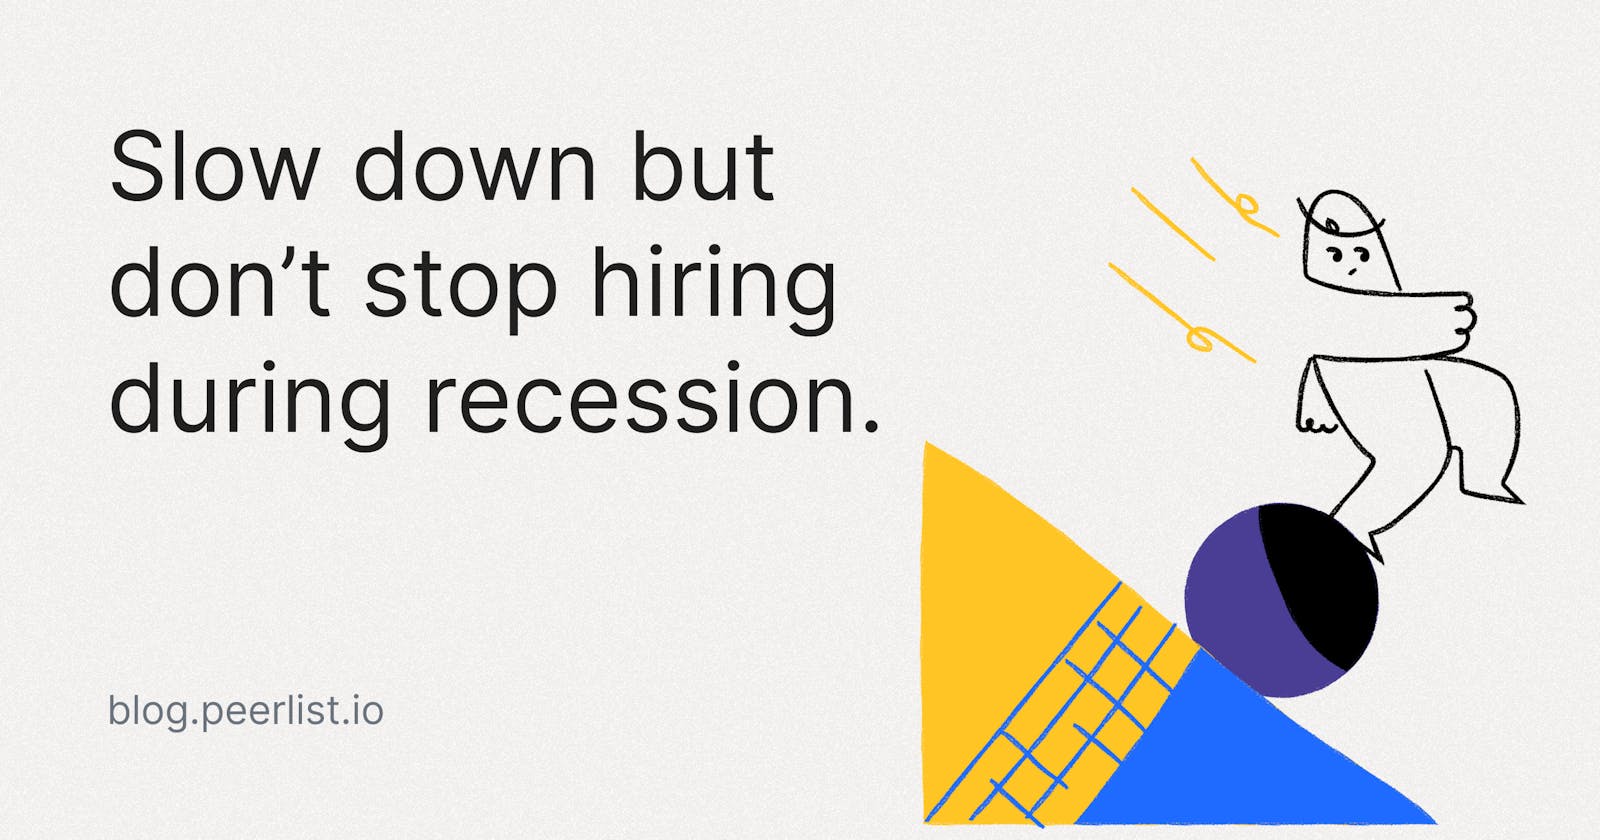 Slow down but don’t stop hiring during the recession.